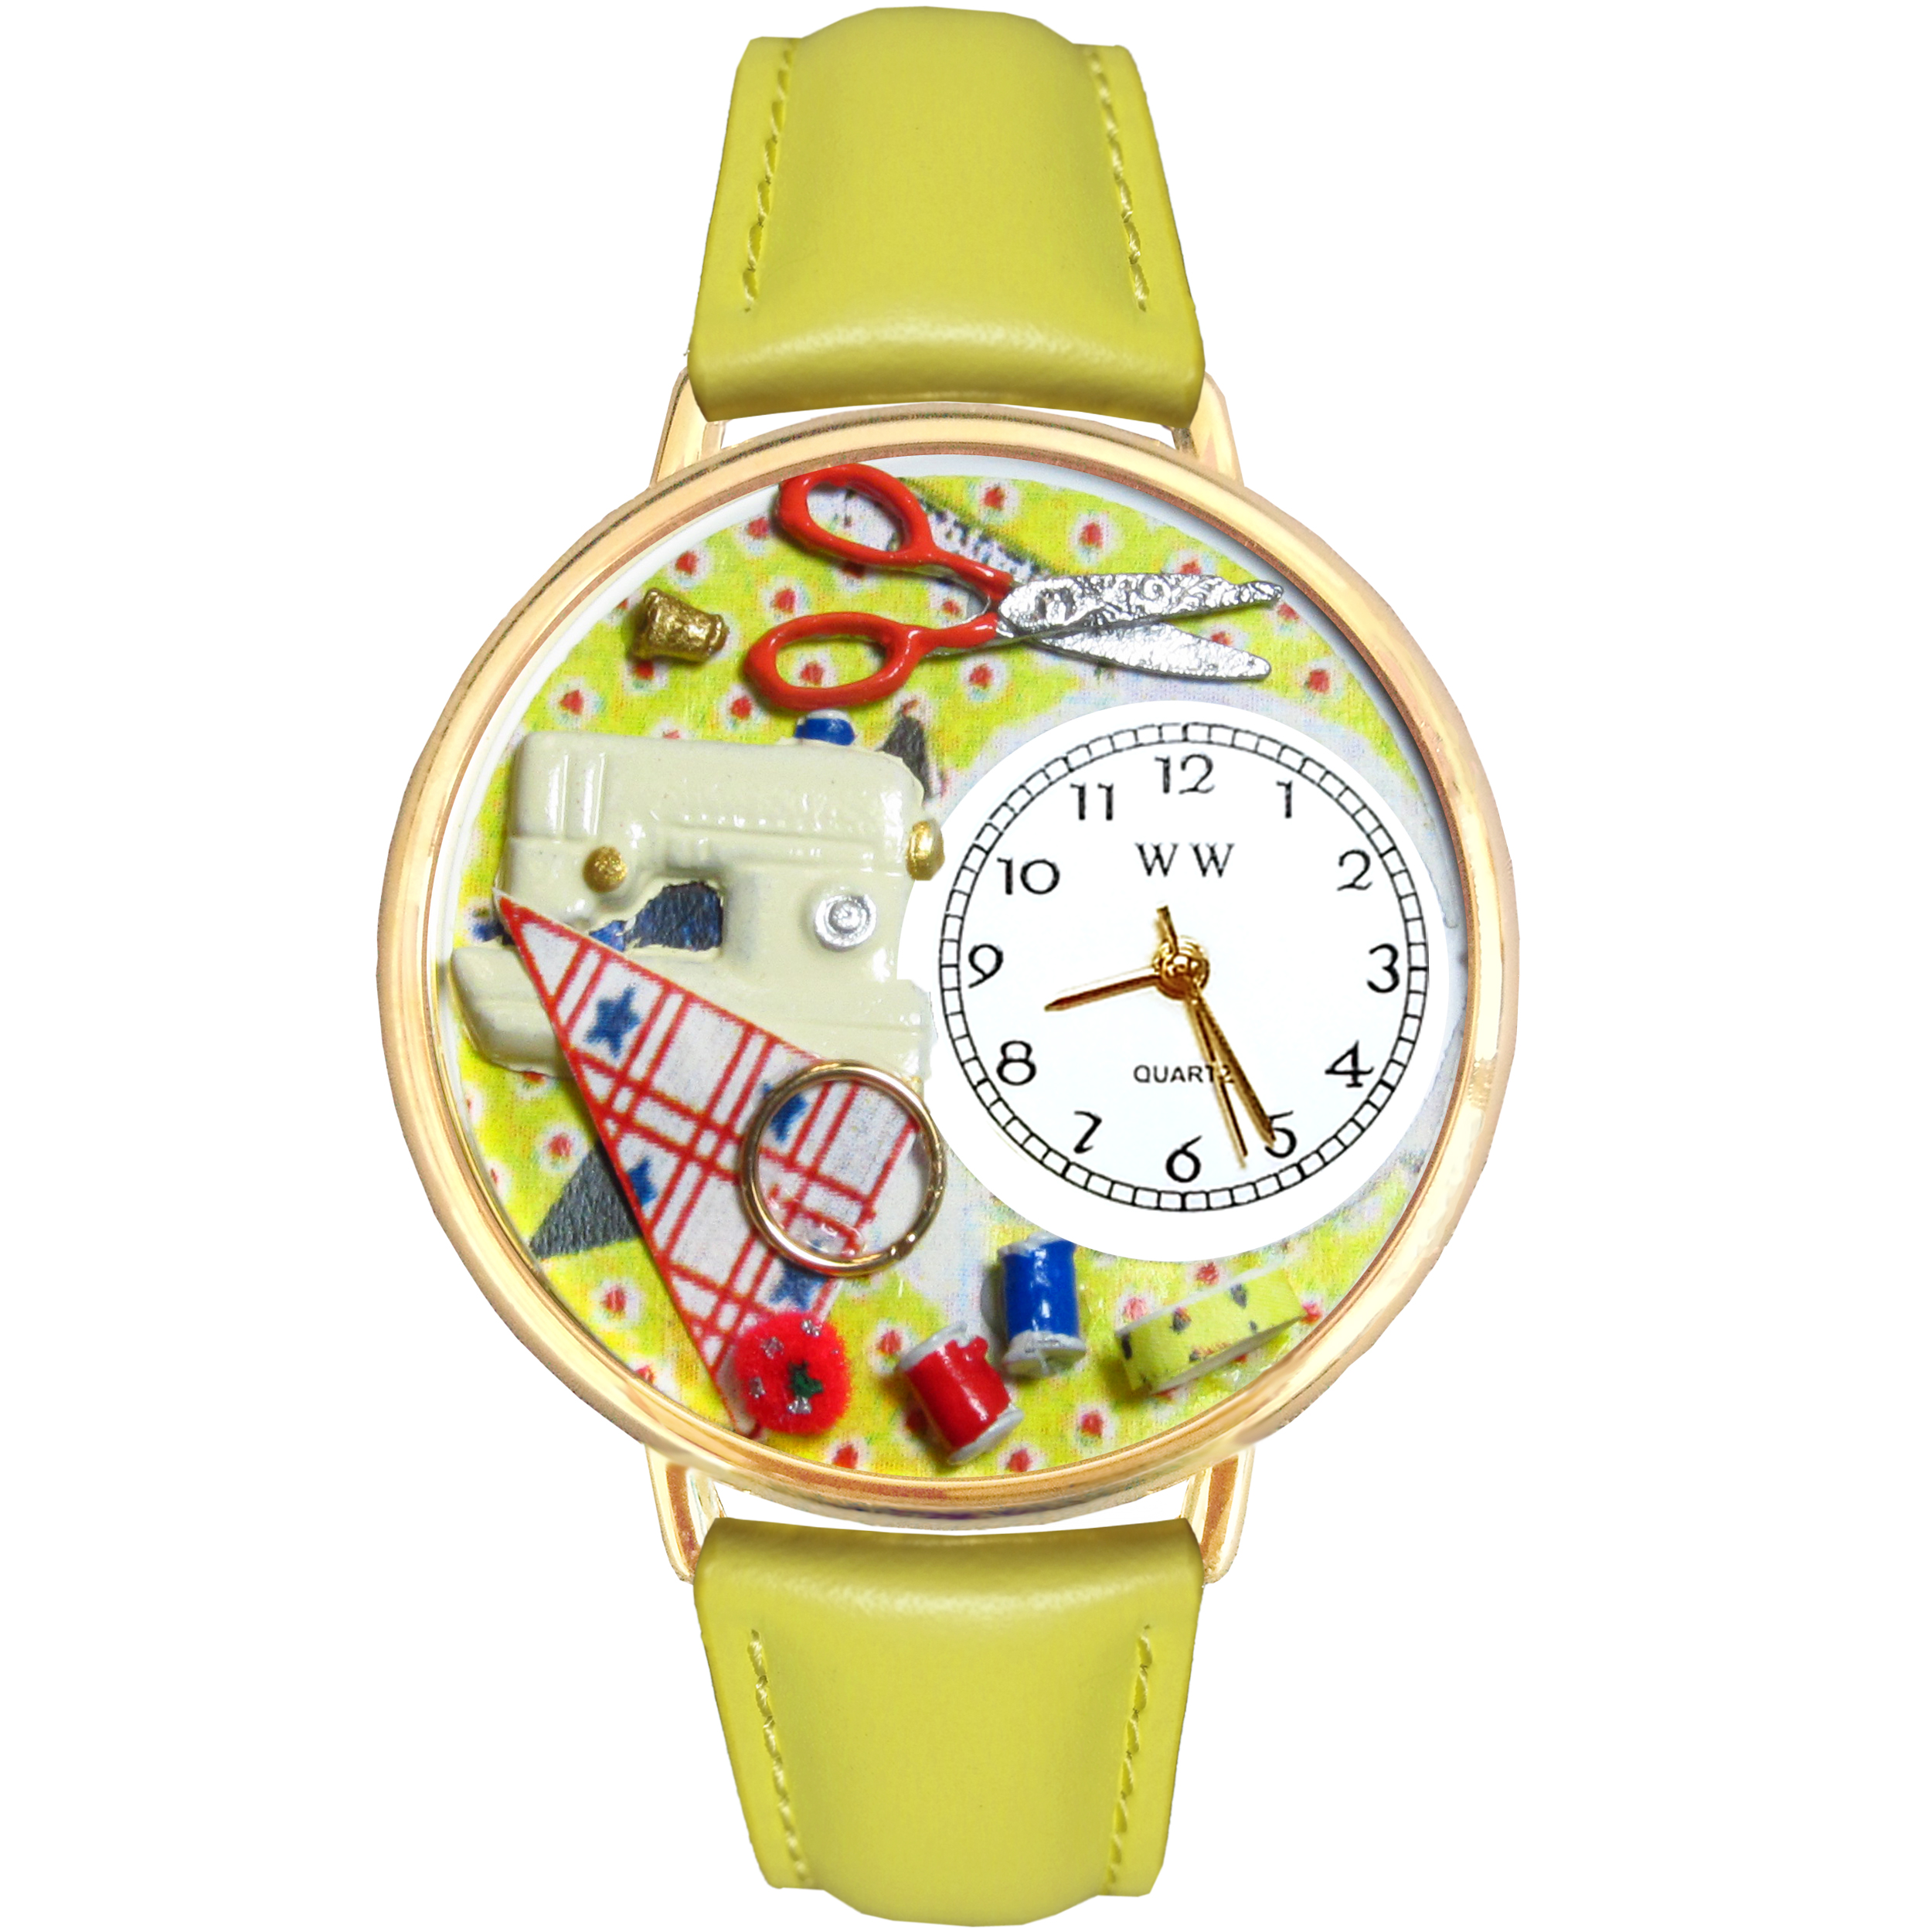 Sewing Watch in Gold (Large)